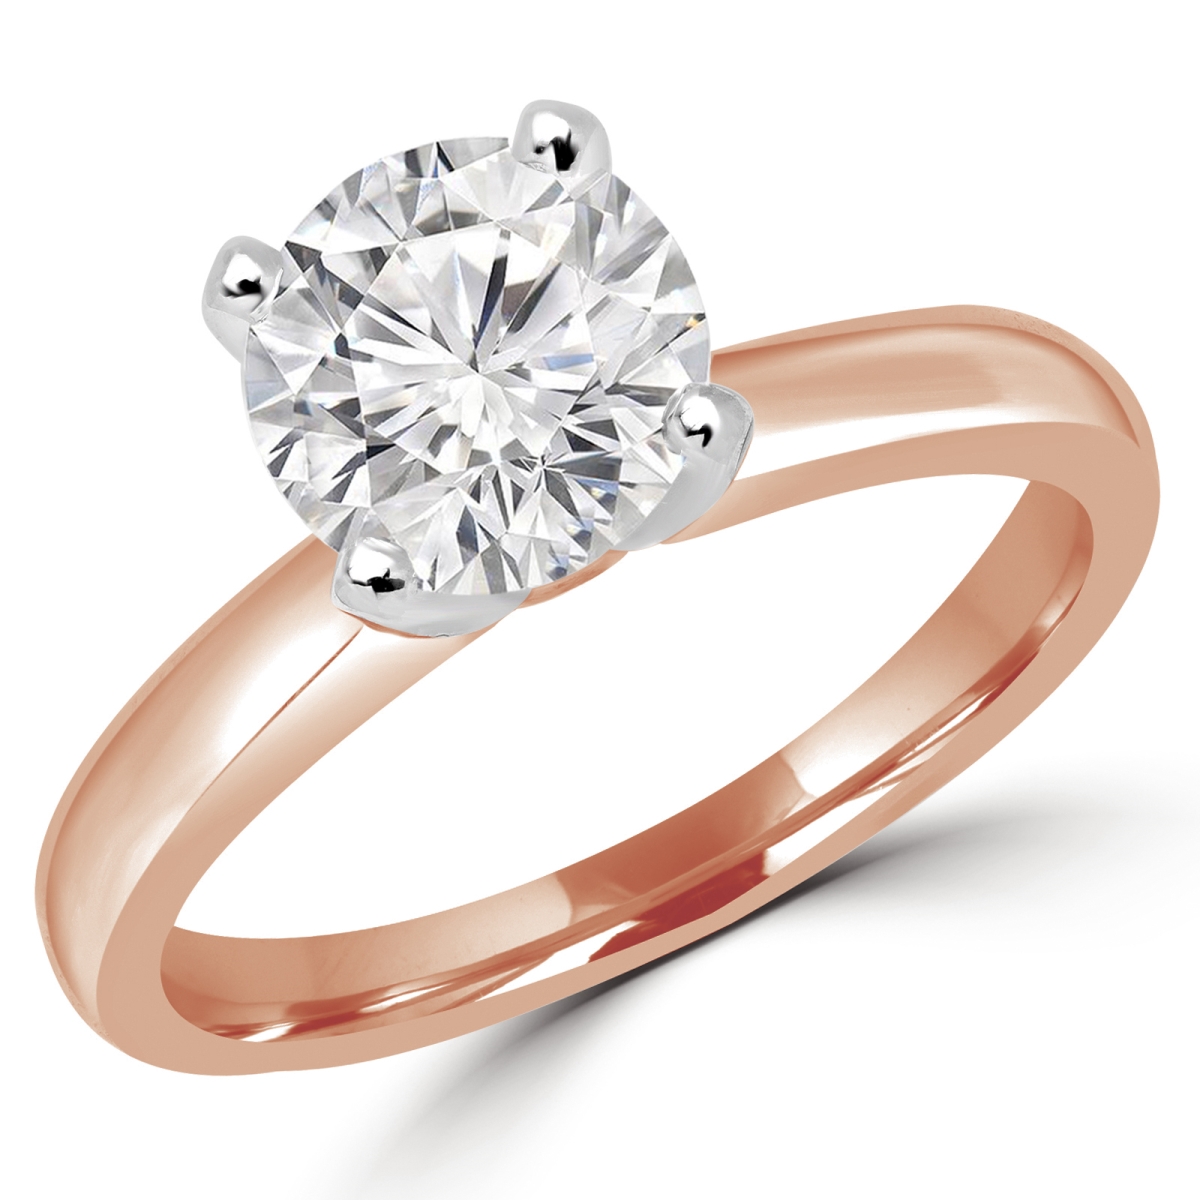 Picture of Majesty Diamonds MD180009-5 0.6 CT Round Diamond Solitaire Engagement Ring in 14K Rose Gold - Size 5